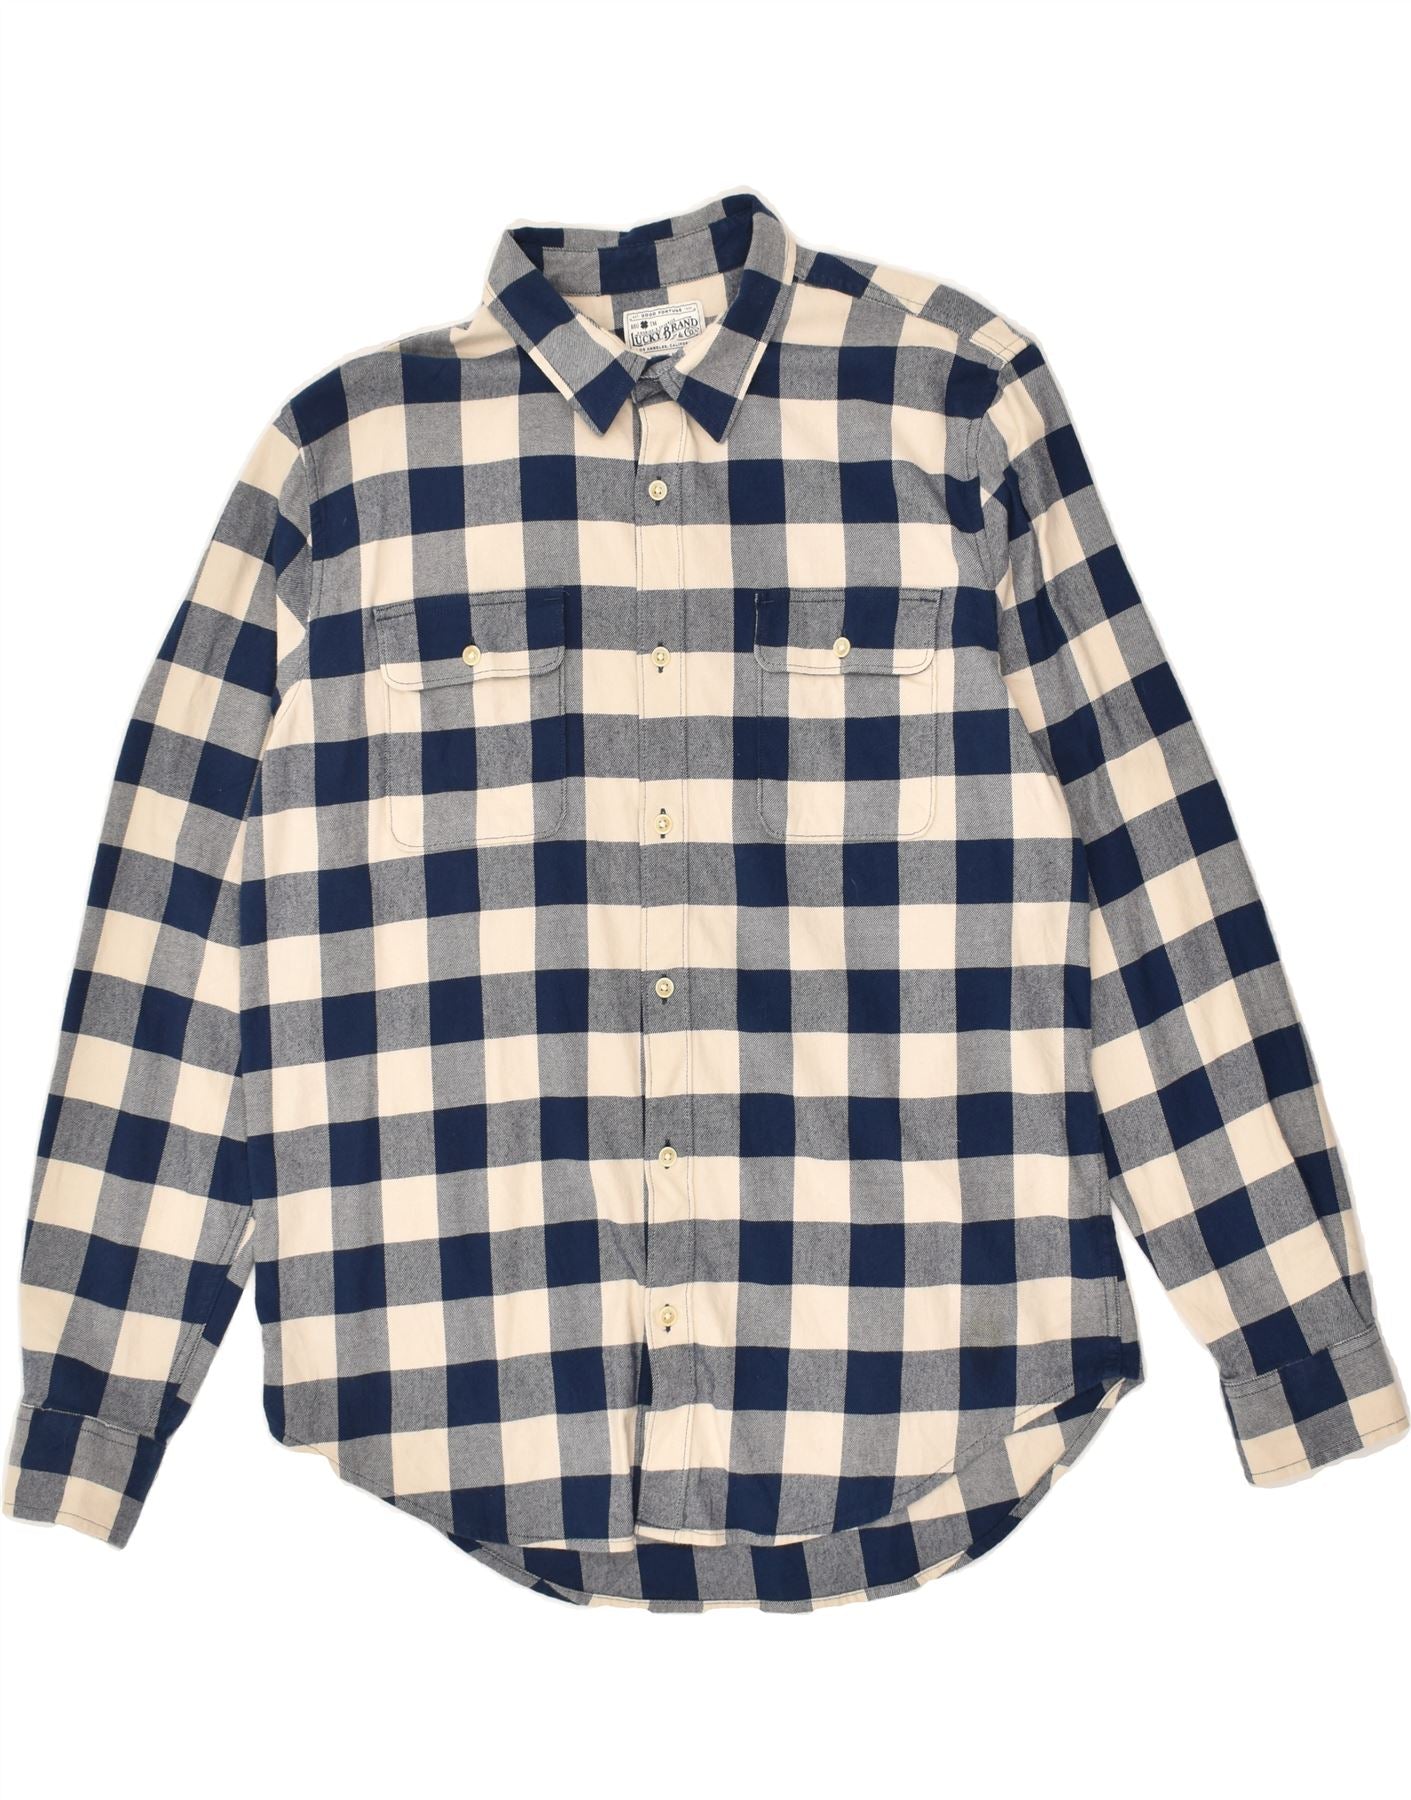 LUCKY BRAND Mens Flannel Shirt Large Blue Check Cotton